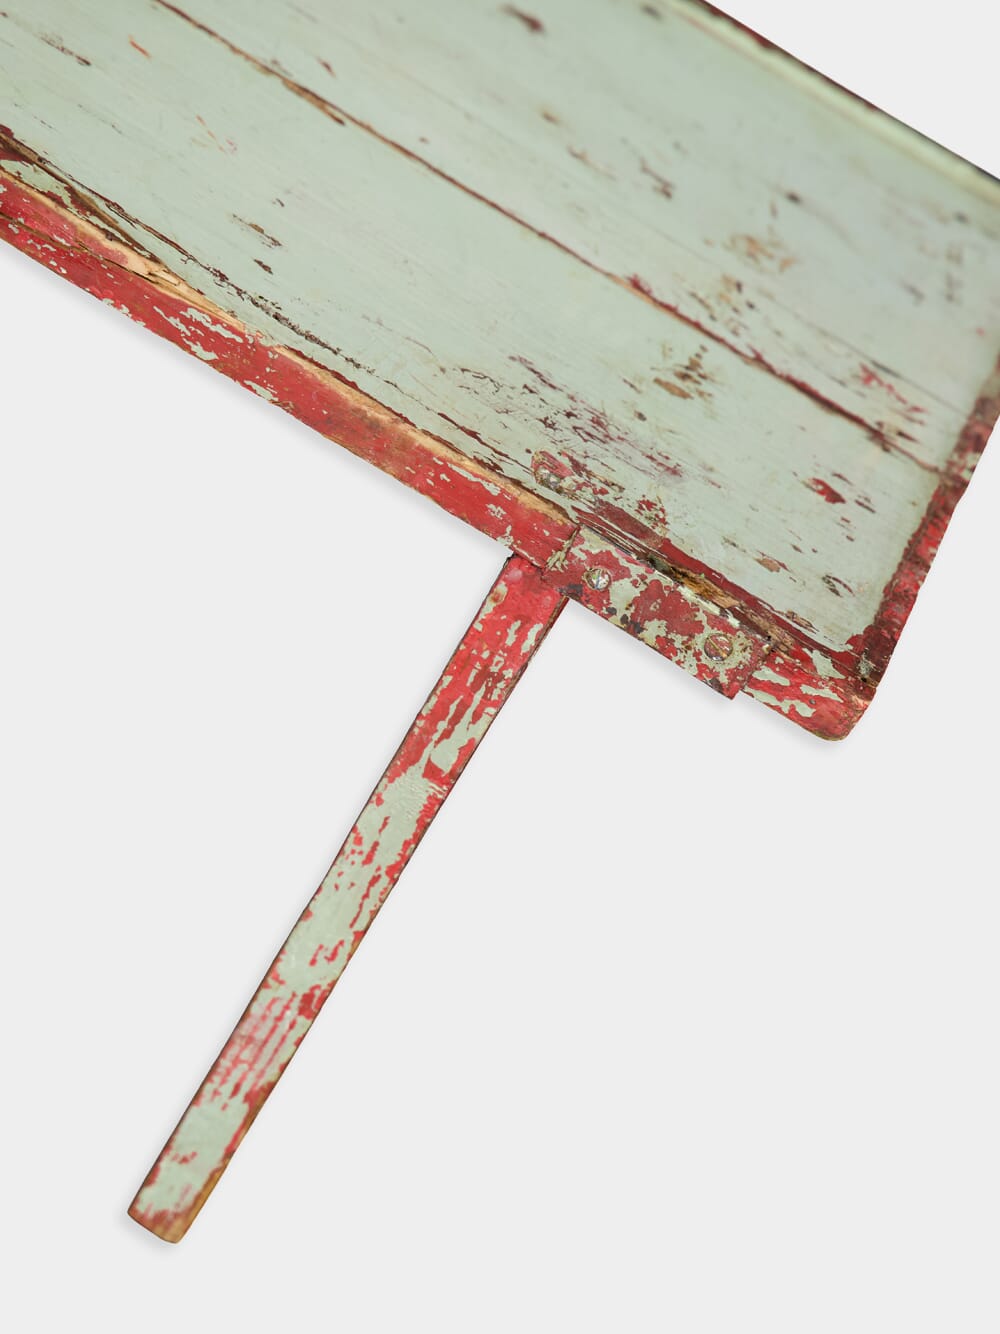 Distressed Effect Red Shelf